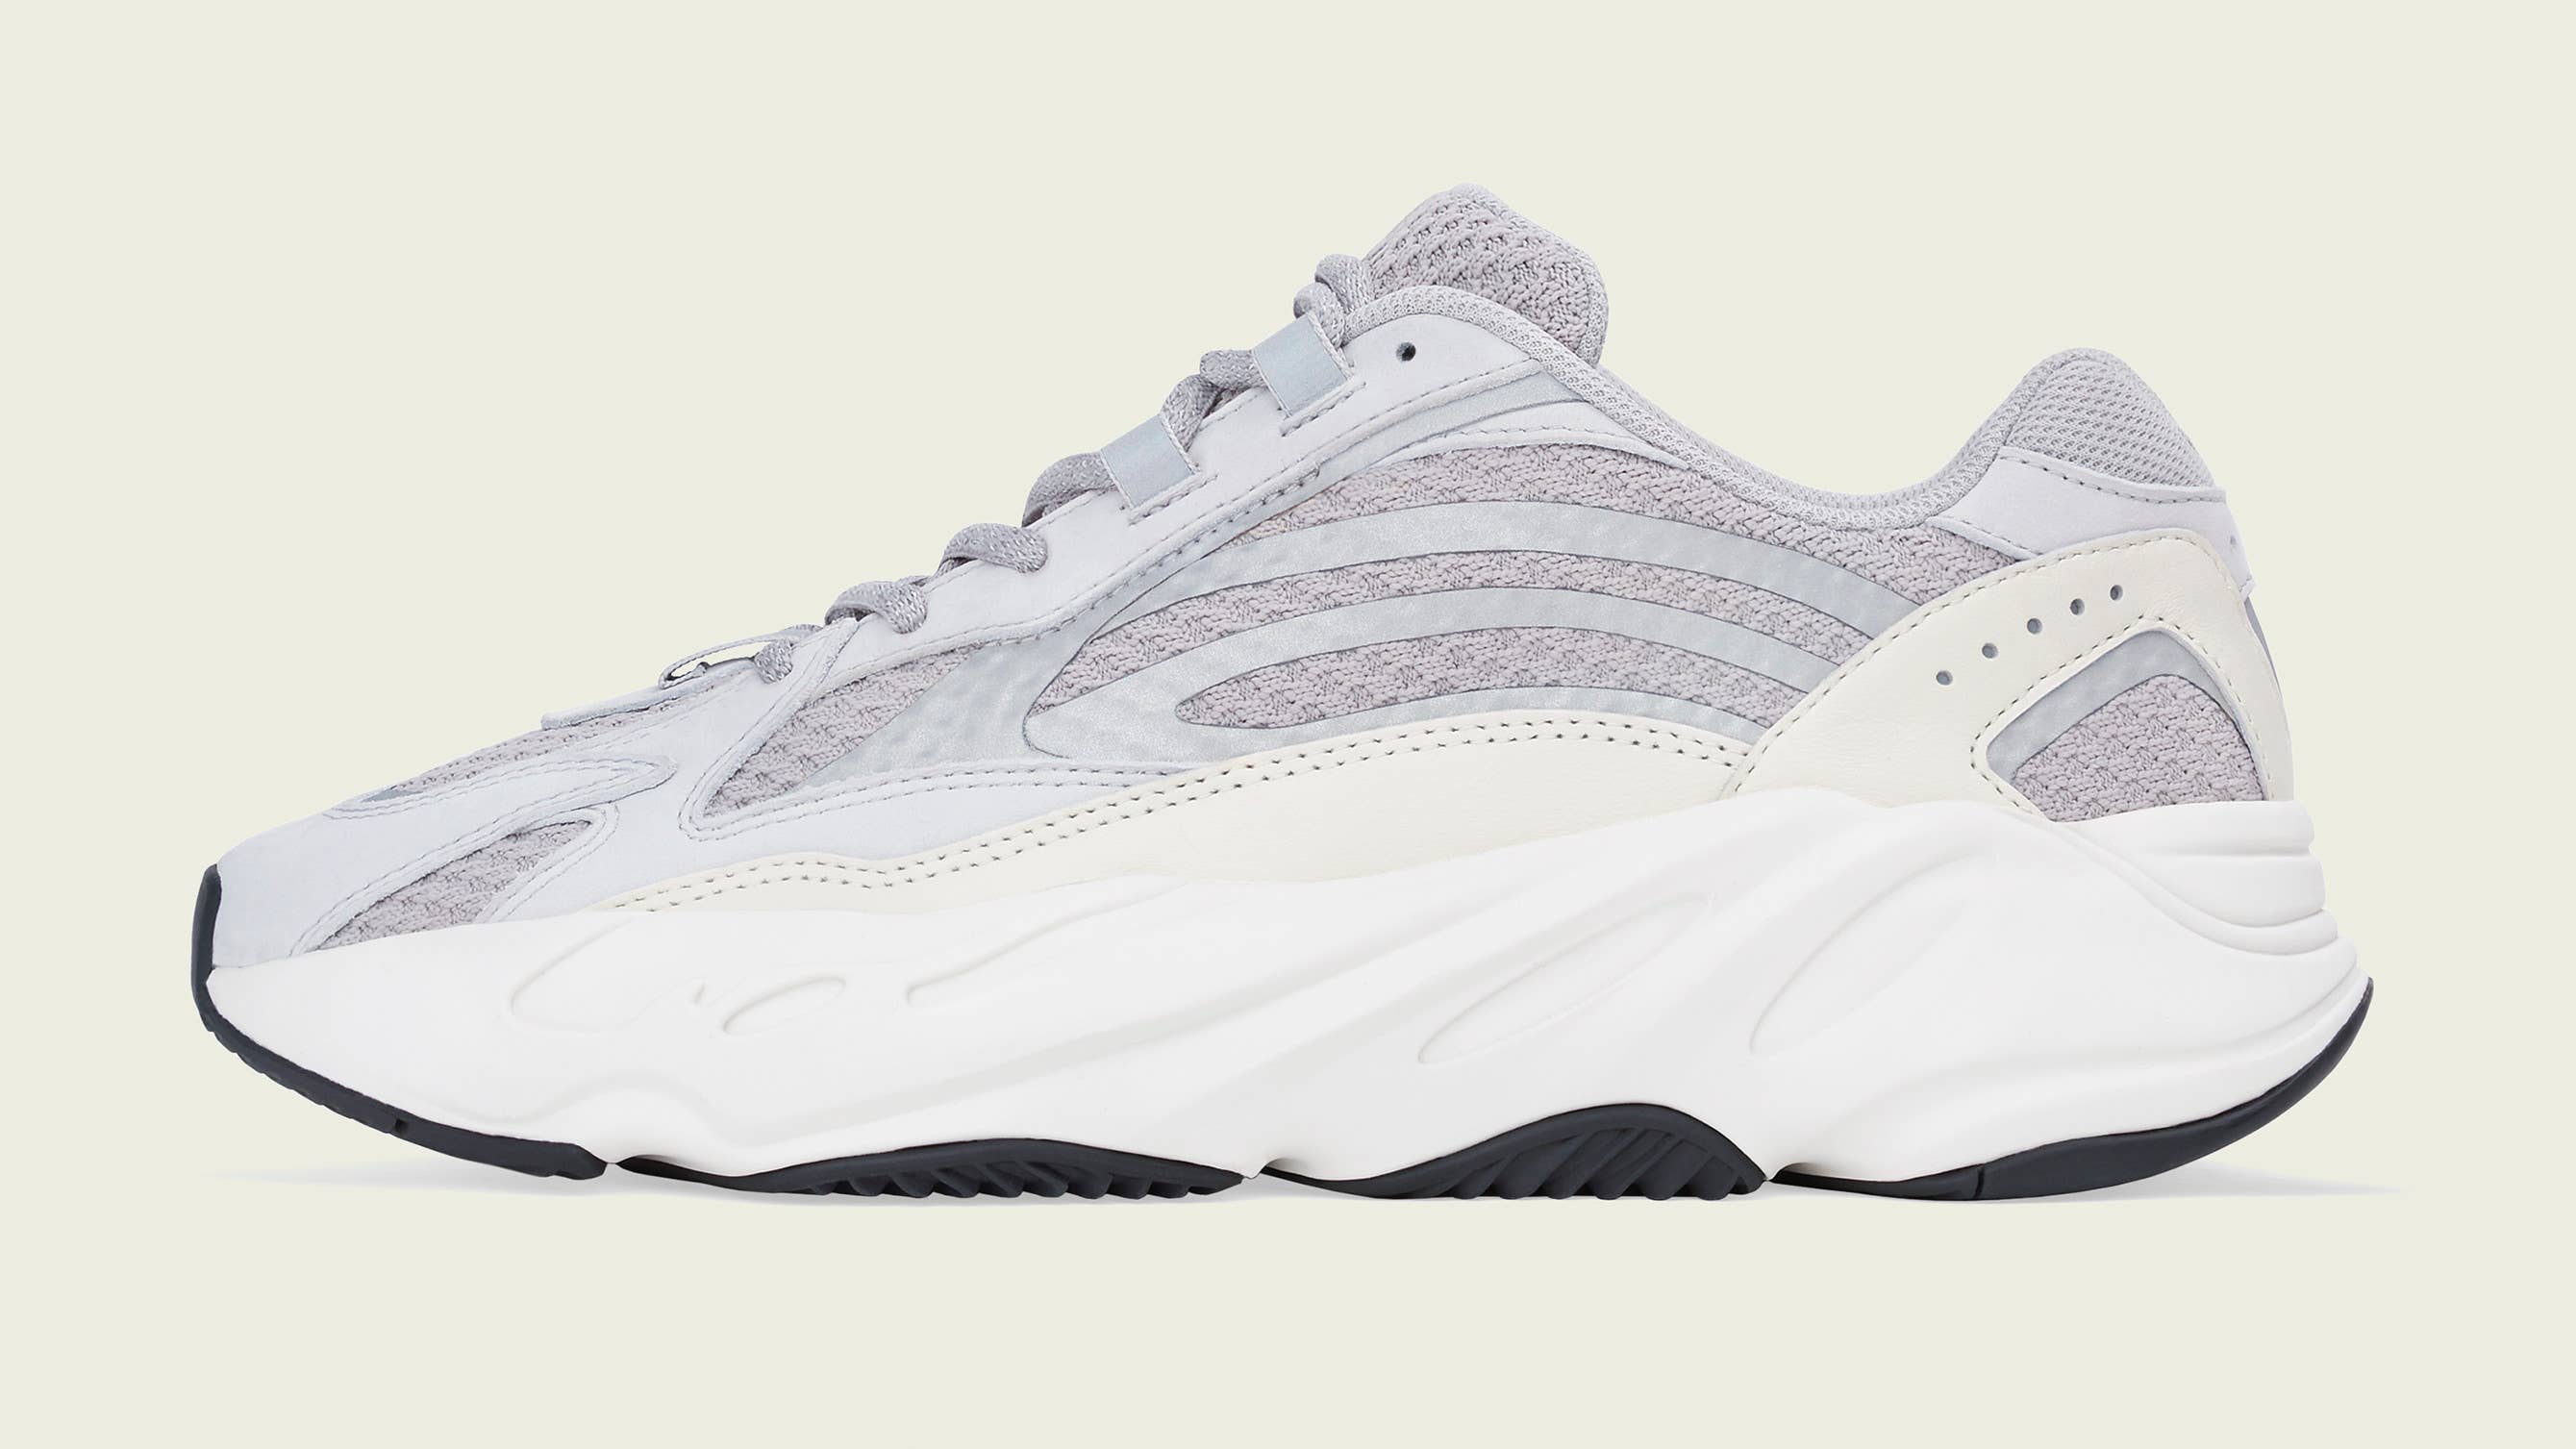 Adidas Yeezy Boost 700 V2 'Static' EF2829 (Lateral)